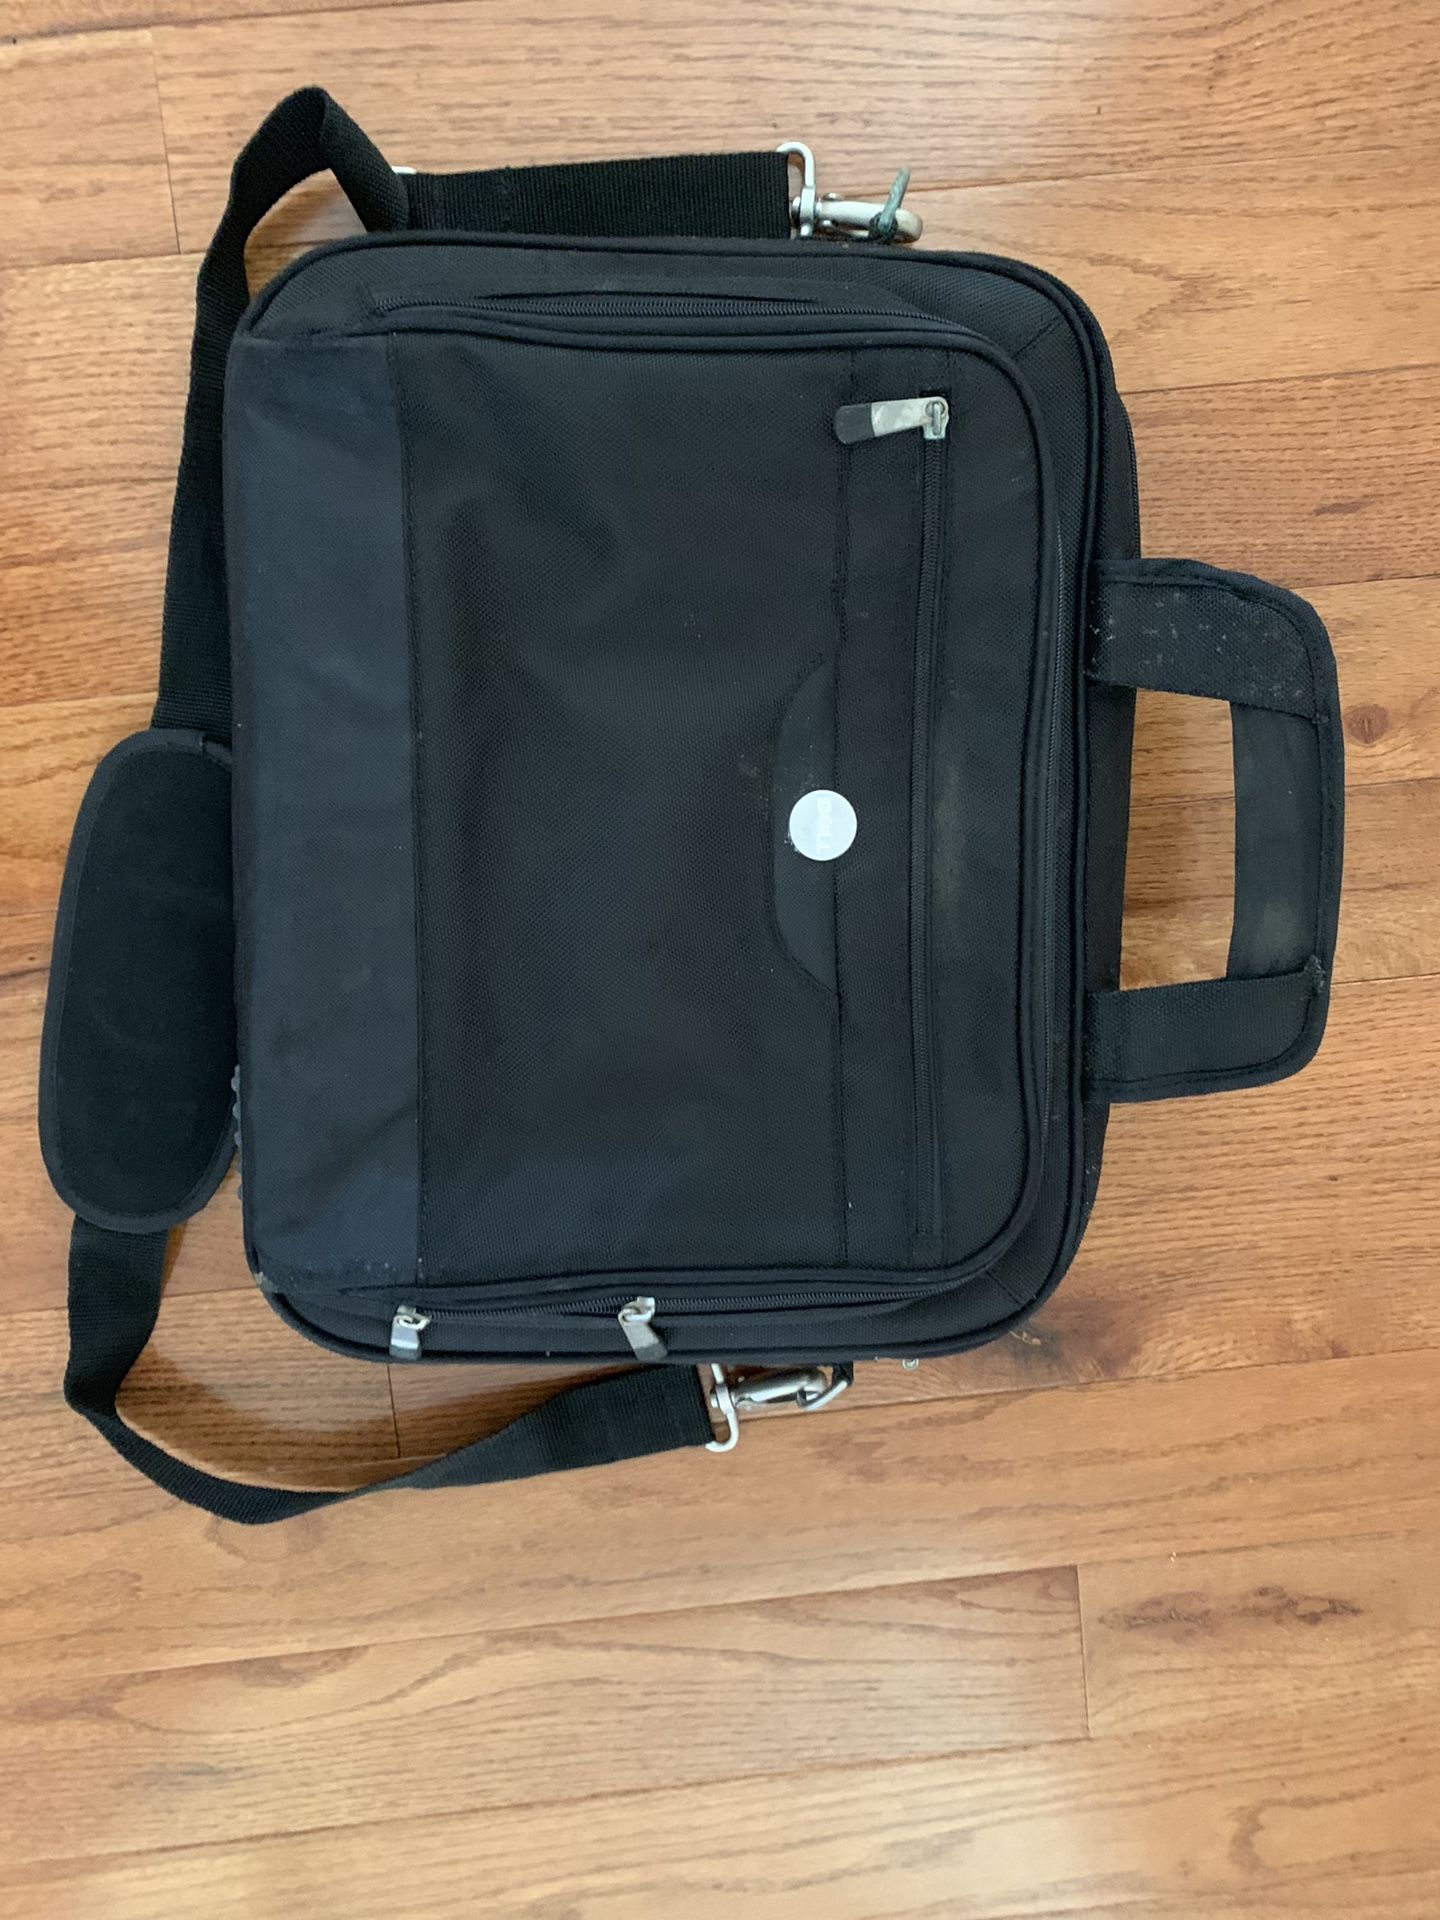 DELL laptop bag new condition